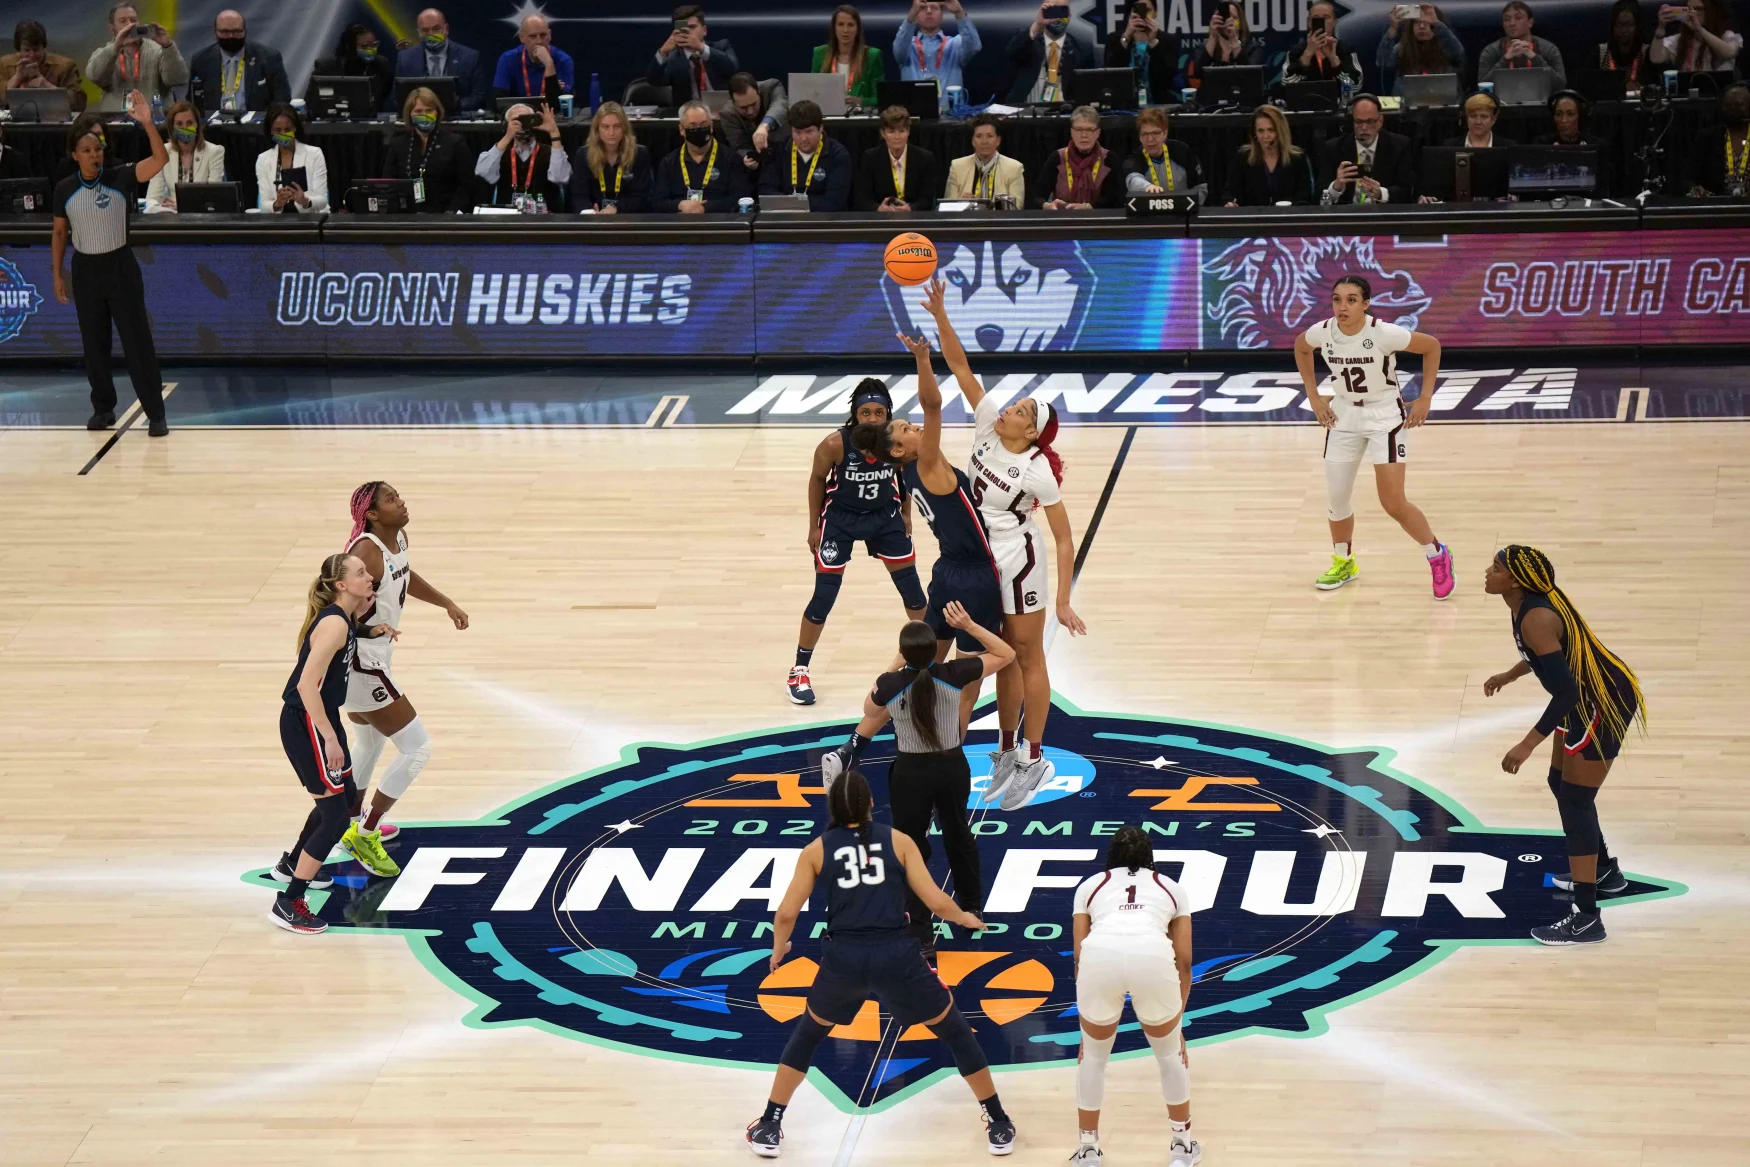 April 3, 2022;  Minneapolis, MN, USA;  A general view of the opening game between UConn Huskies forward Olivia Nelson-Ododa (20) and South Carolina Gamecocks forward Victaria Saxton (5) in the Final Four NCAA Tournament Championship game in women's college basketball at Target Center.  South Carolina defeated UConn 64-49.  Mandatory Credit: Kirby Lee-USA TODAY Sports